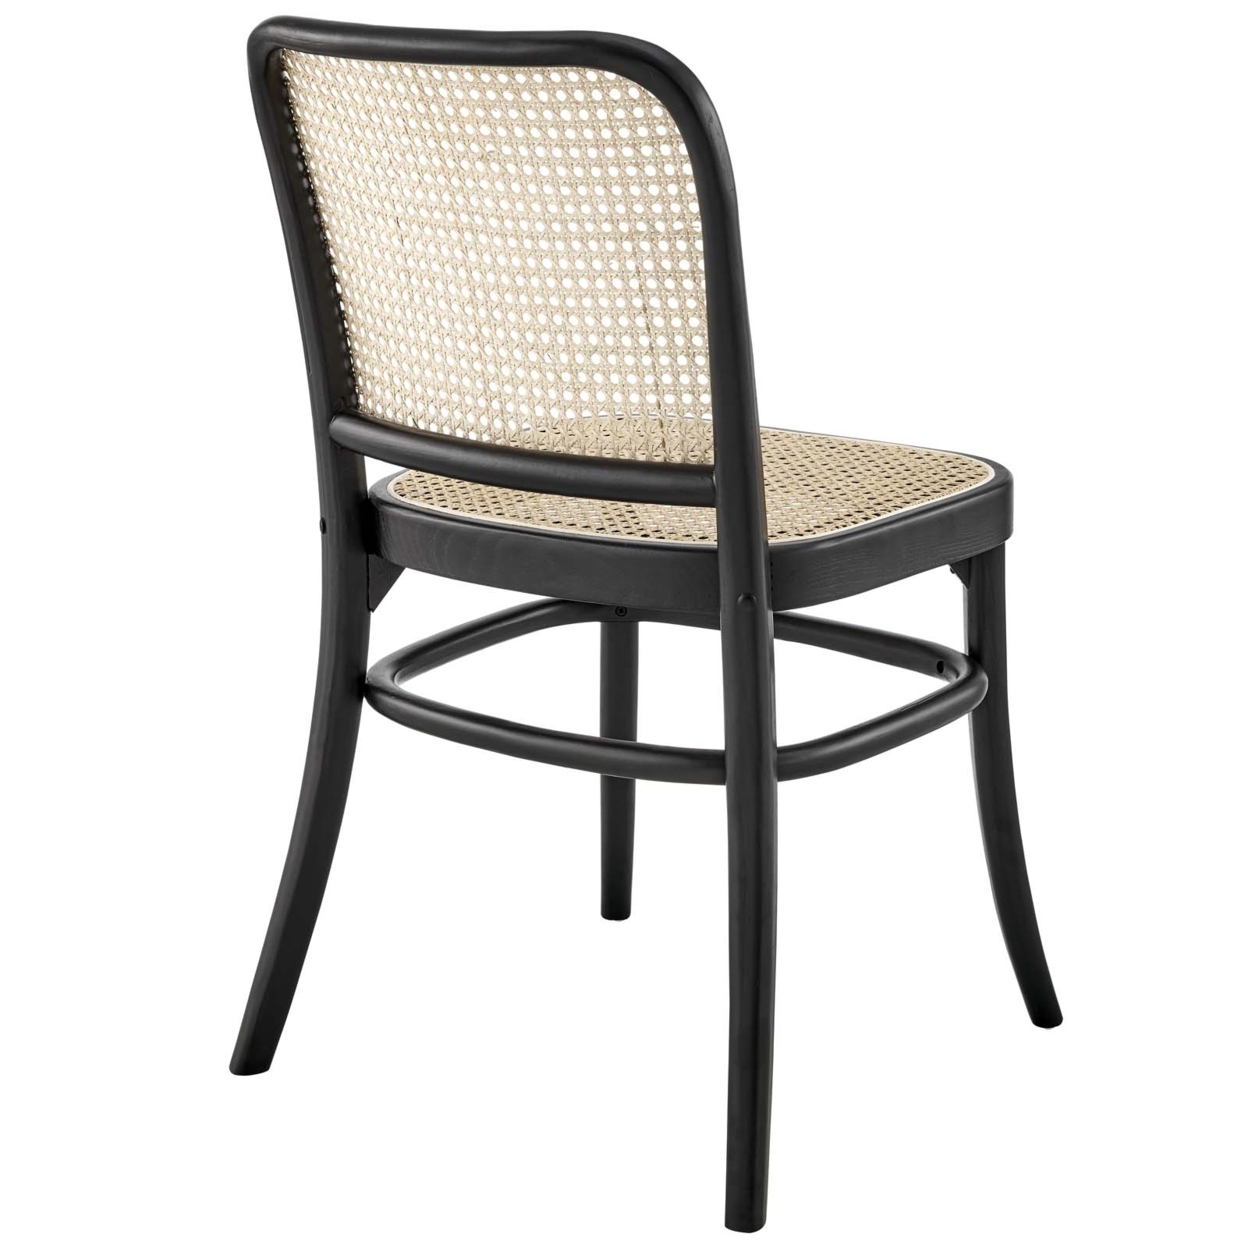 Winona Wood Dining Side Chair, Black